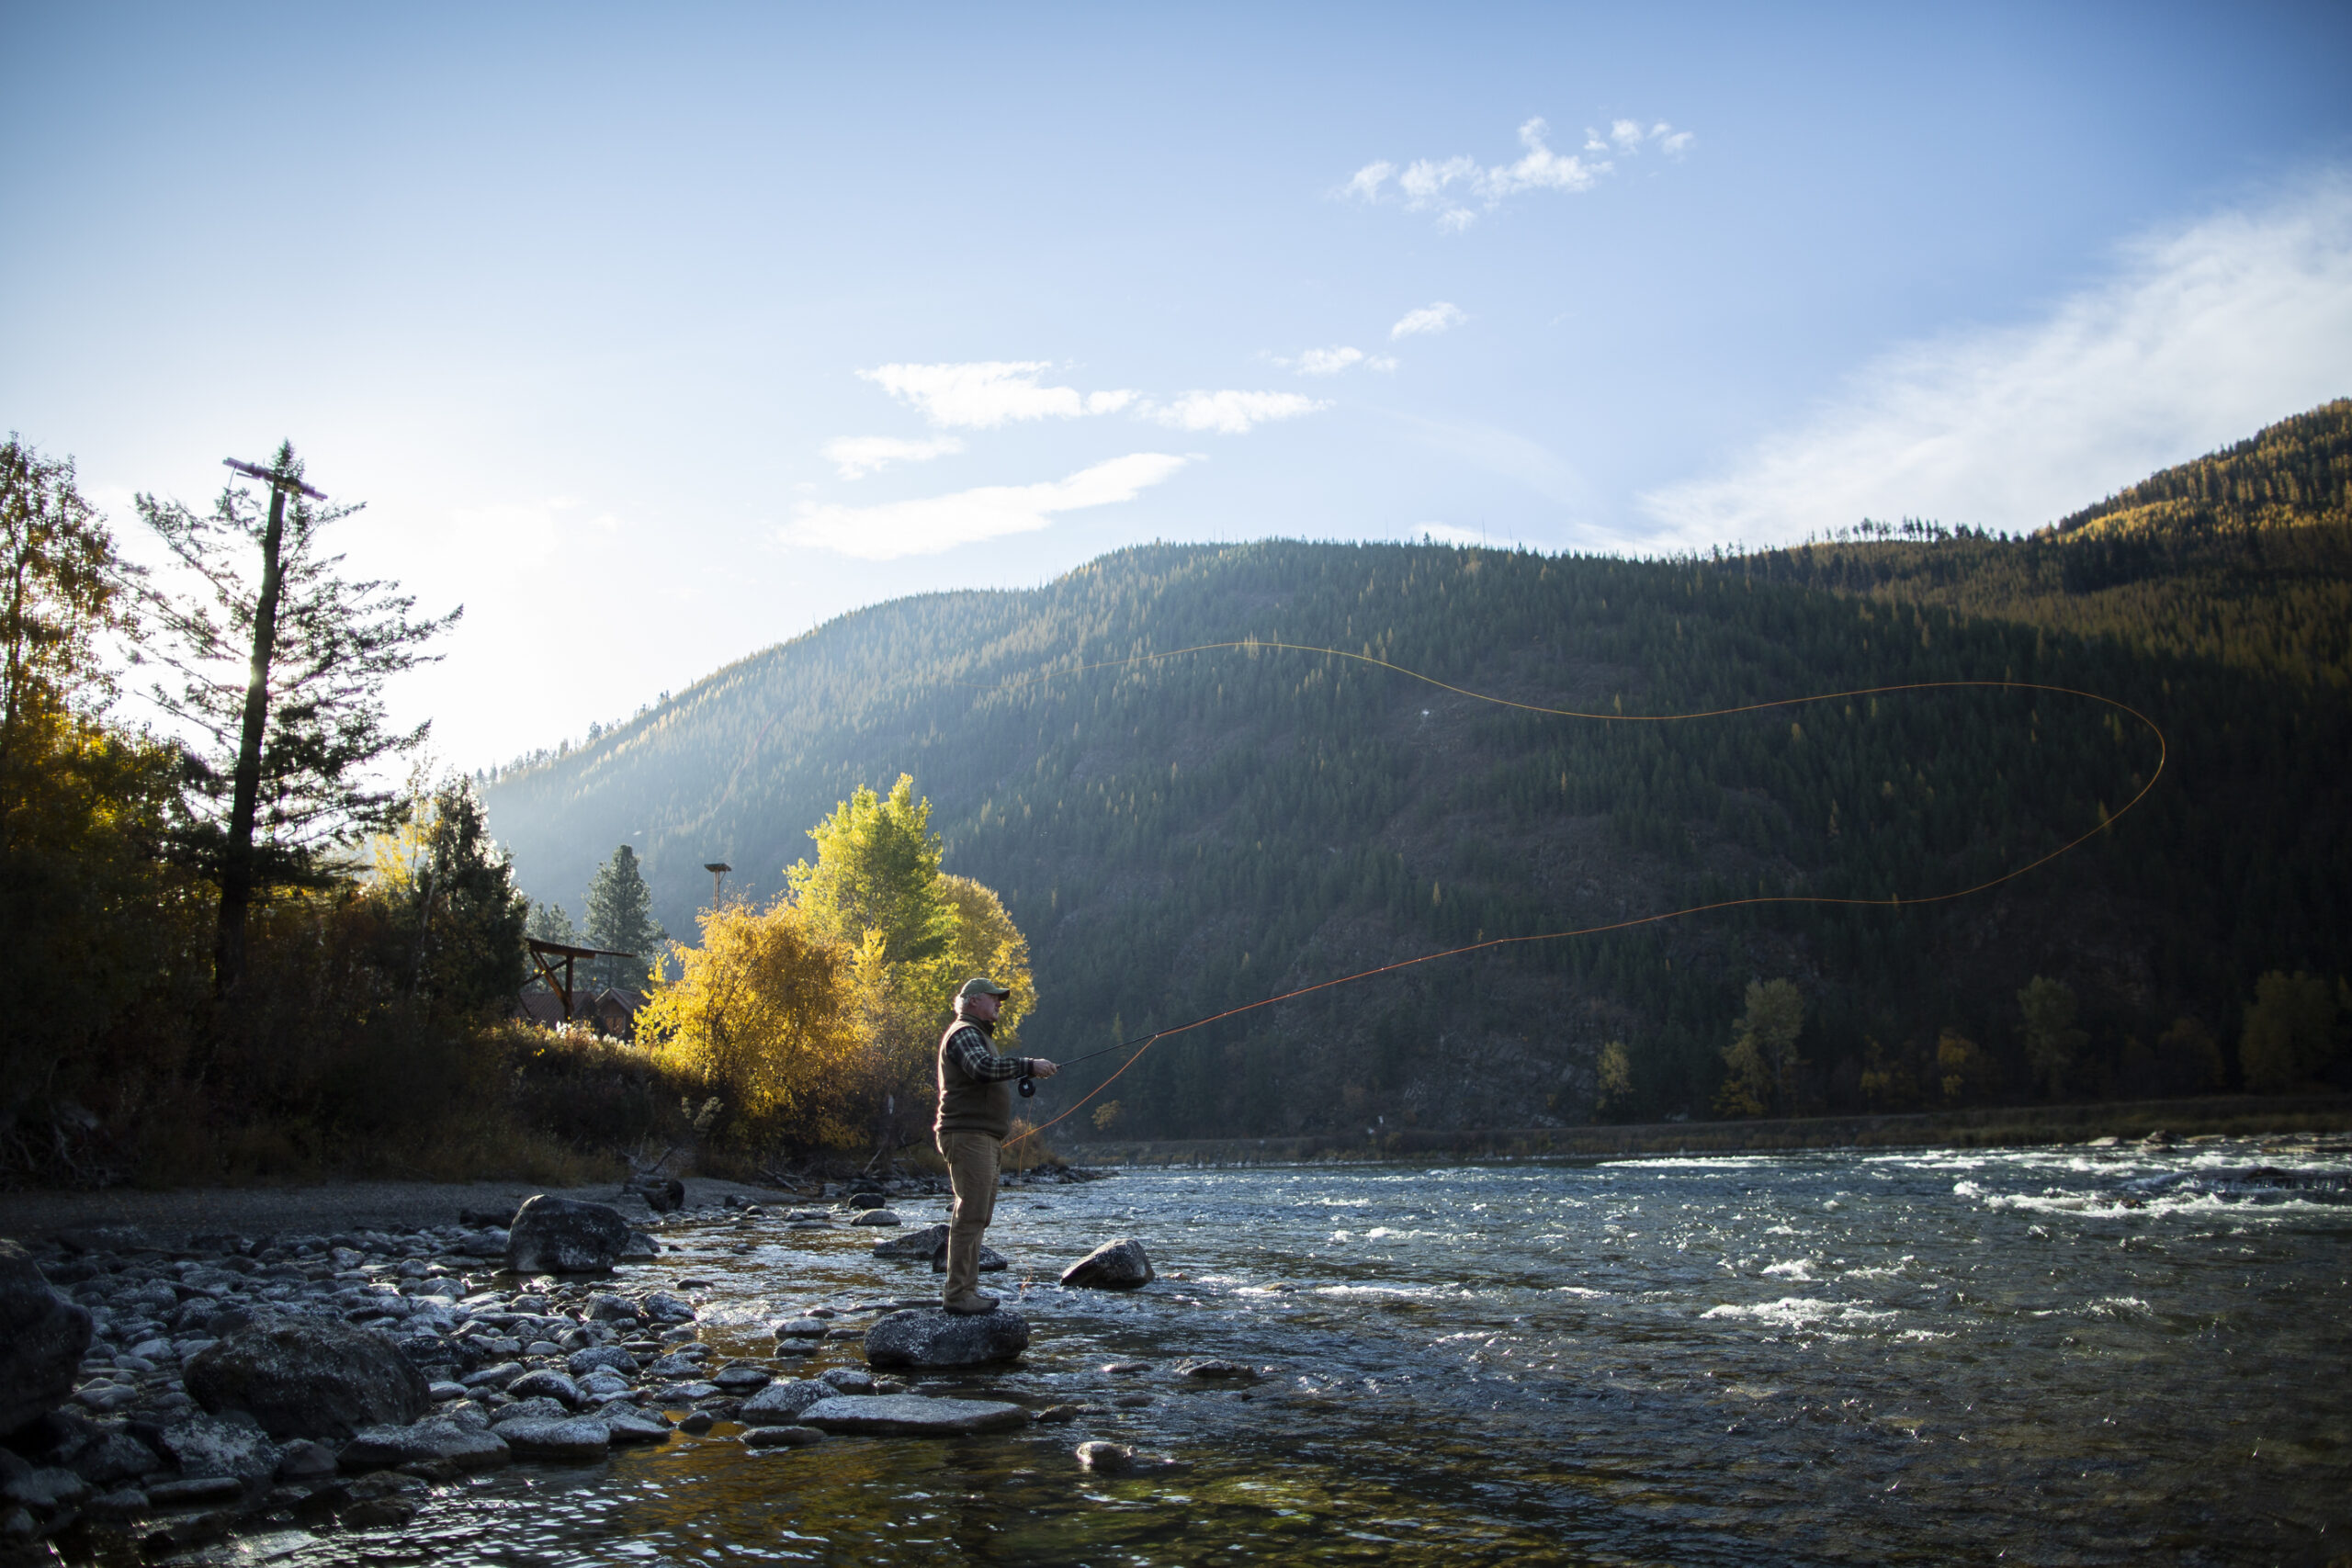 A man stands on a river casting a fly fishing rod